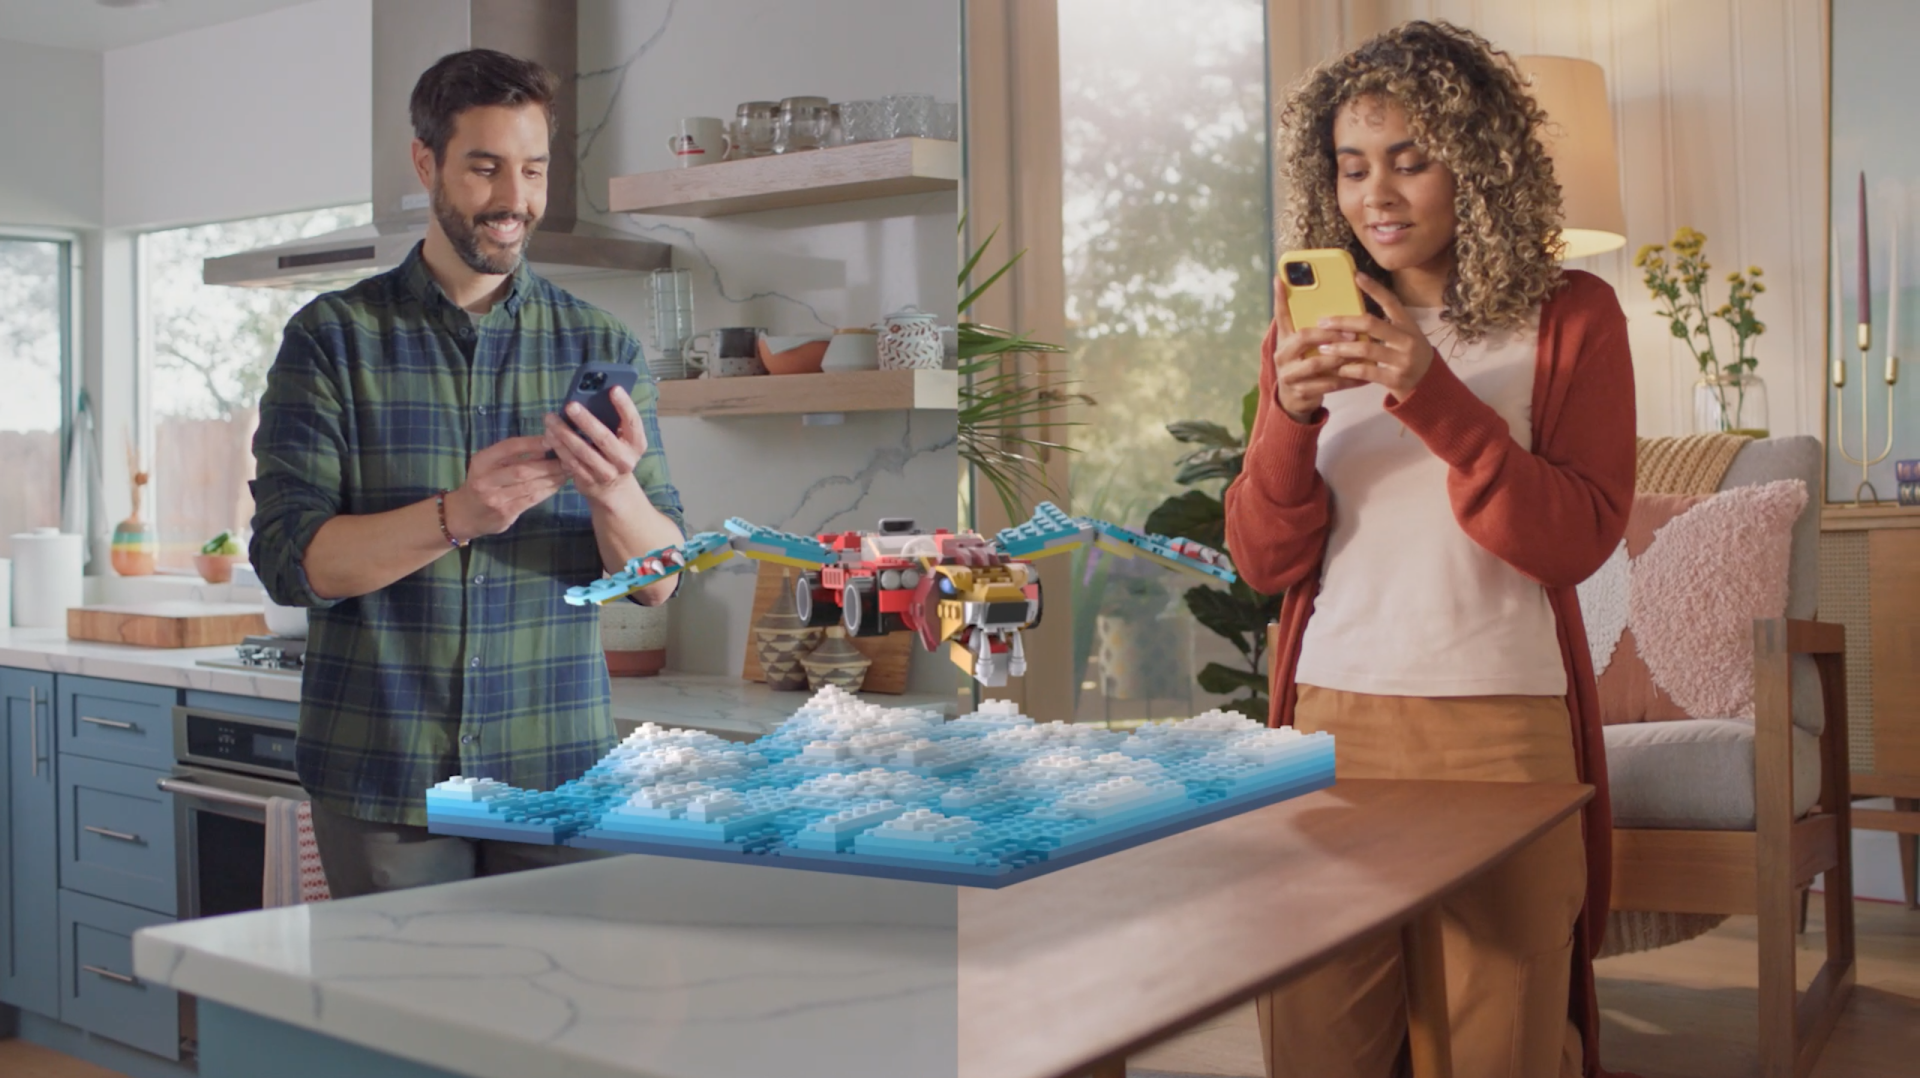 Snapchat shows off new AR features and more ‘inclusive’ camera tech